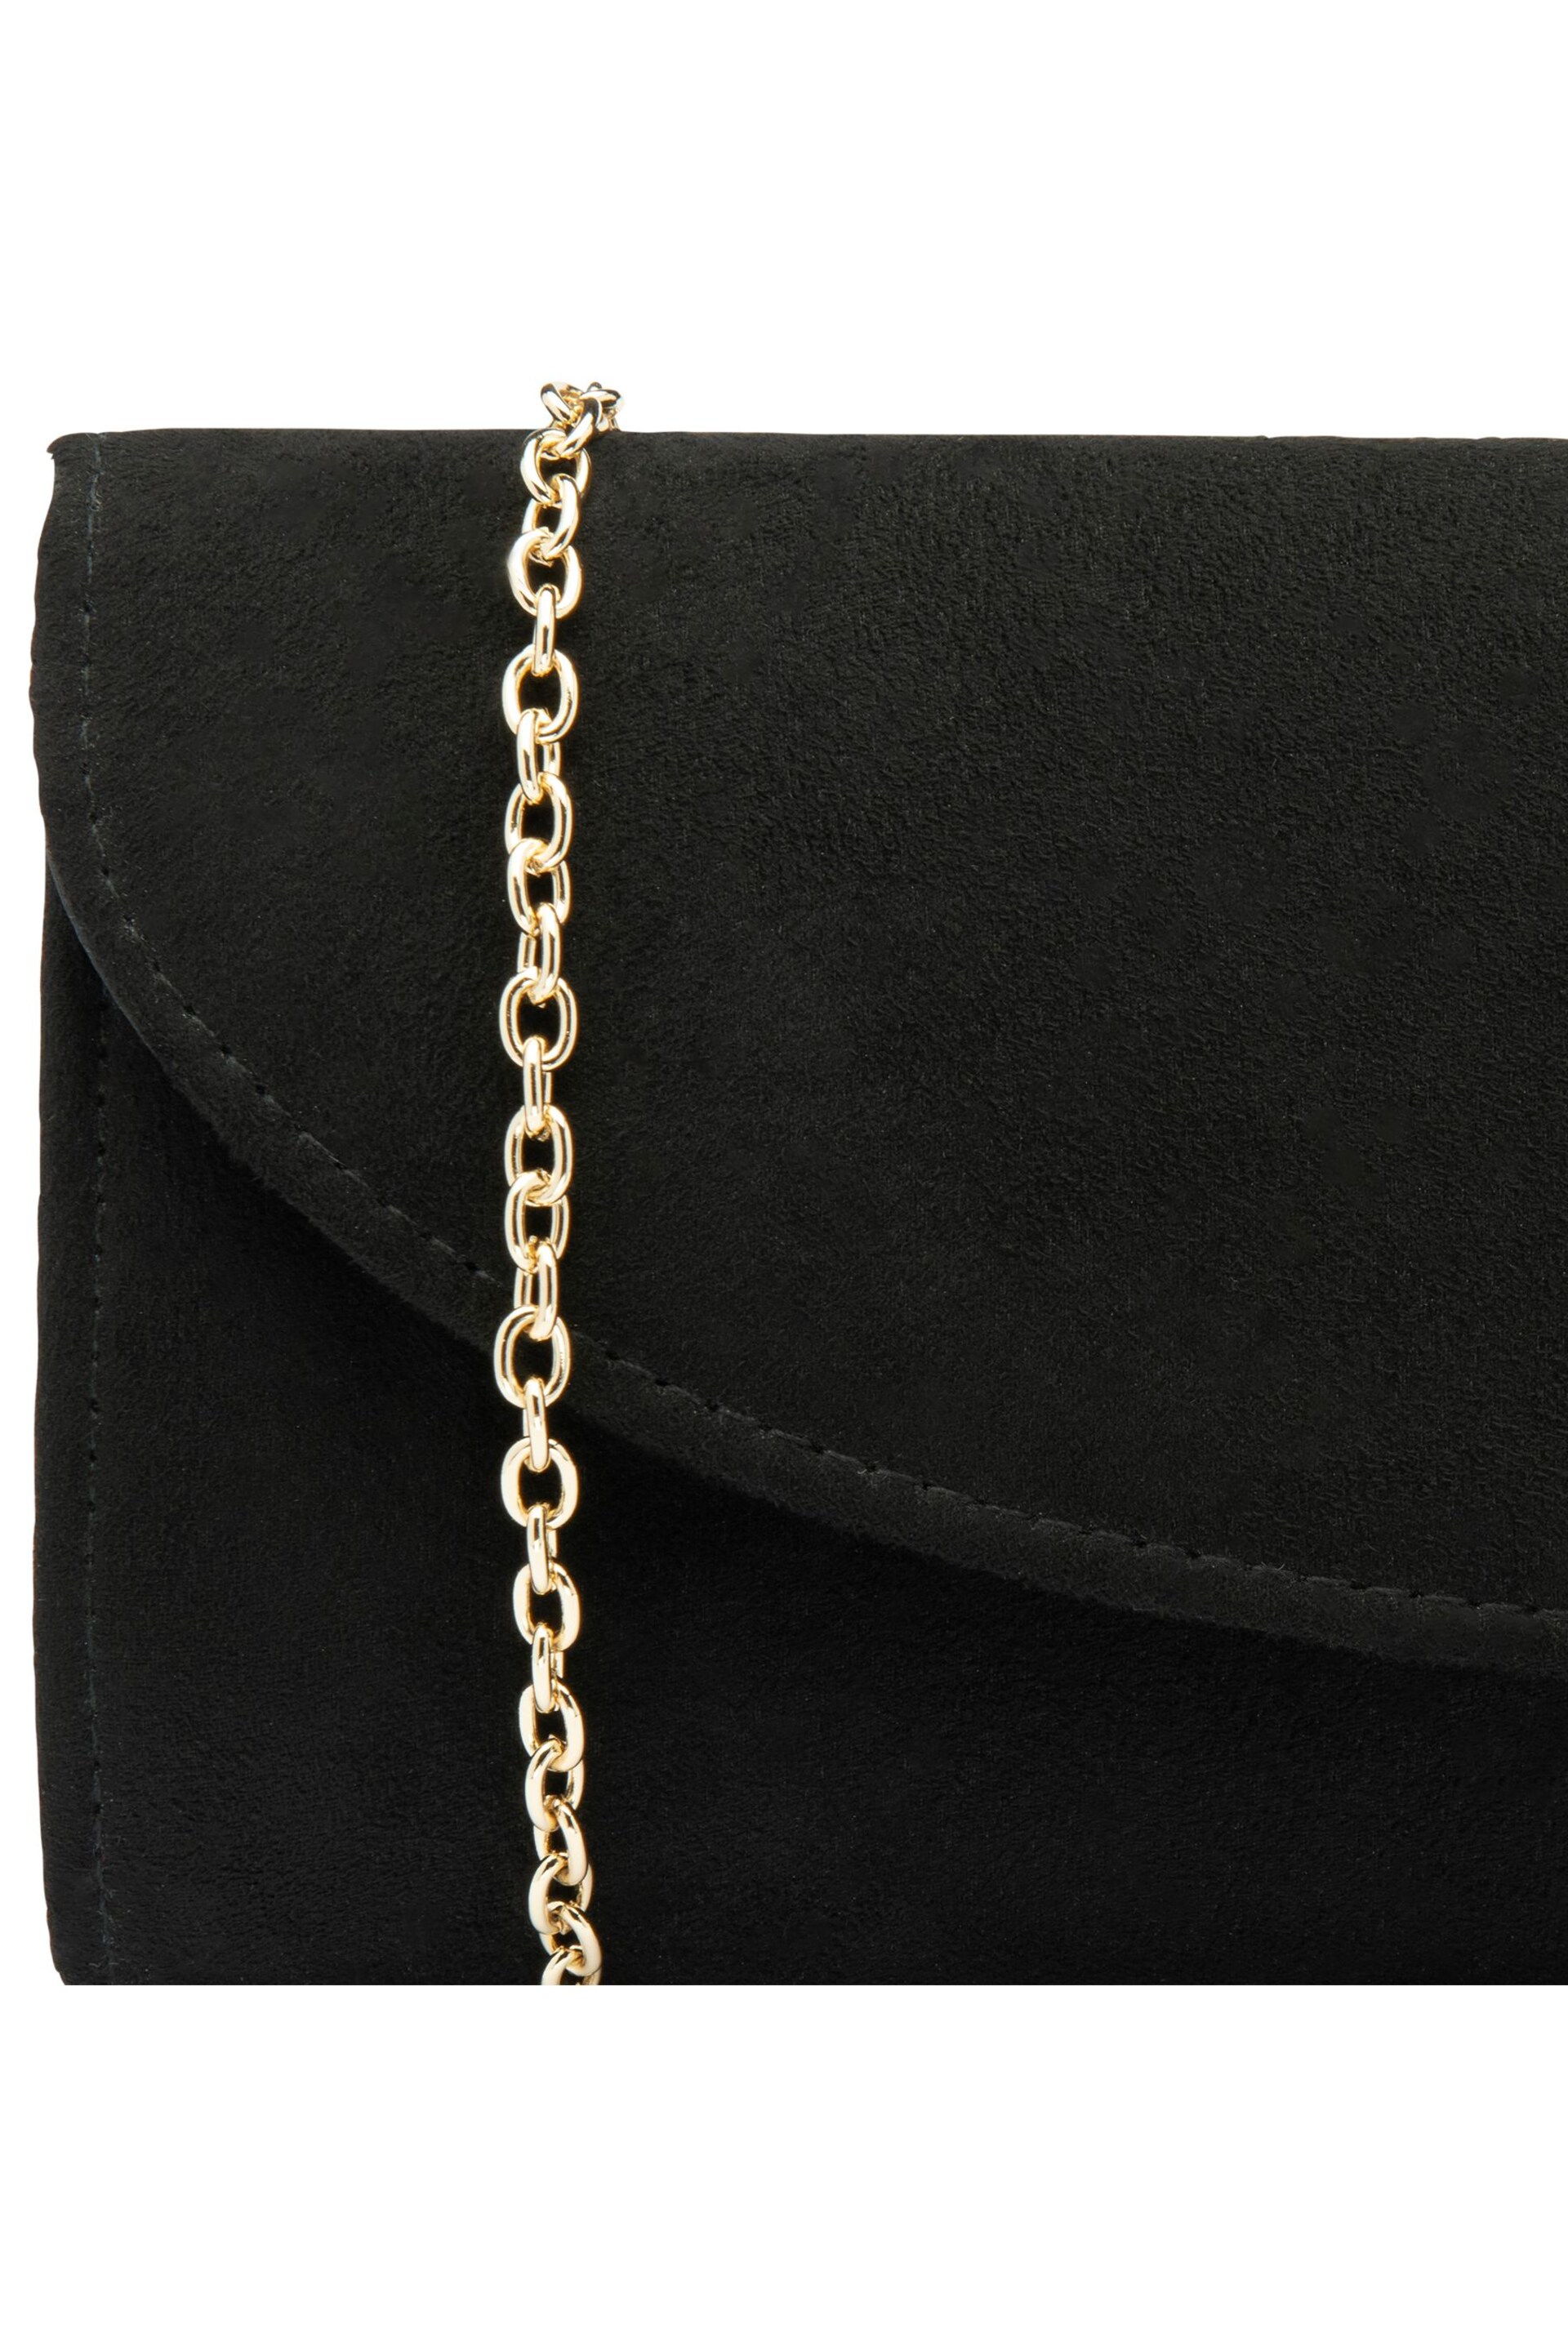 Lotus Black Clutch Bag with Chain - Image 4 of 4